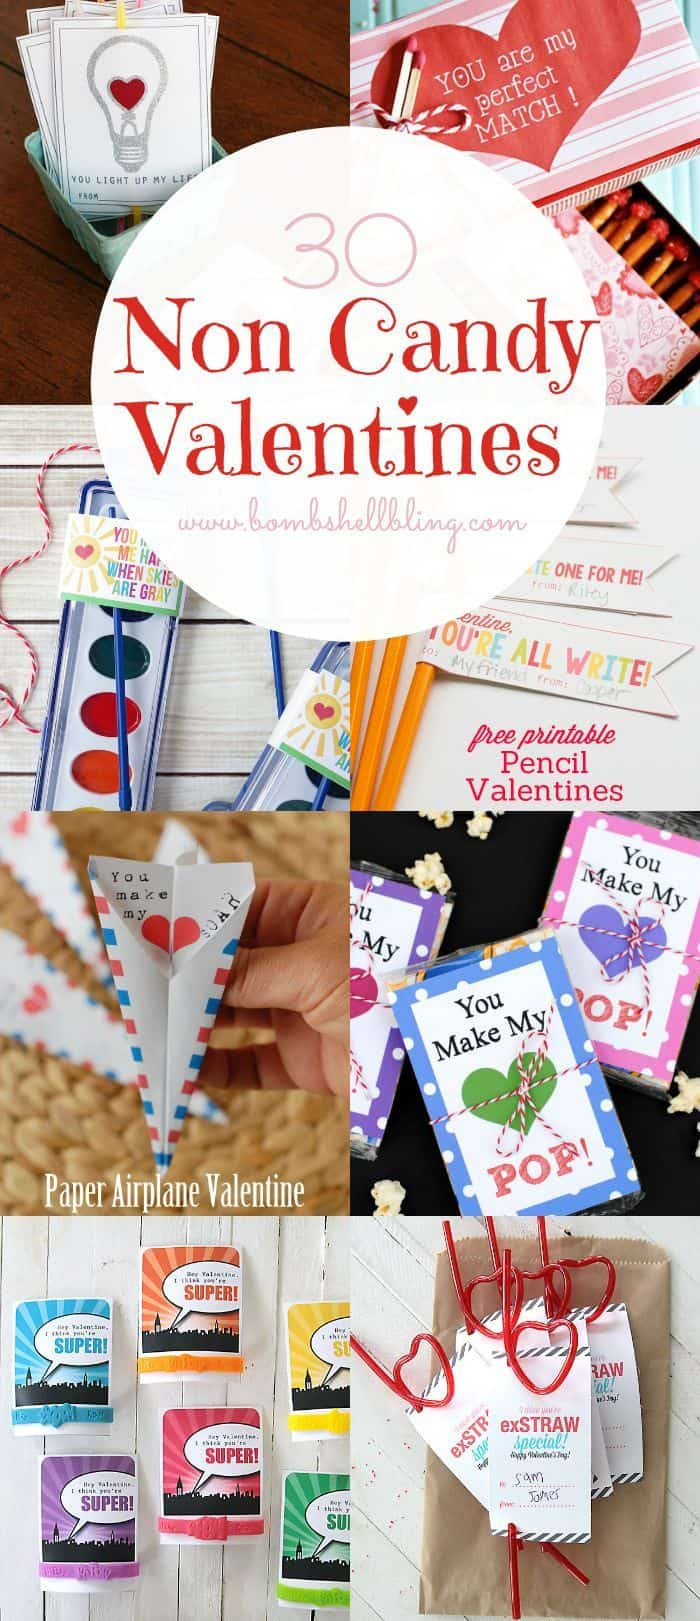 Valentines Gifts For Children
 Non Candy Valentine s Day Gift Ideas for Kids